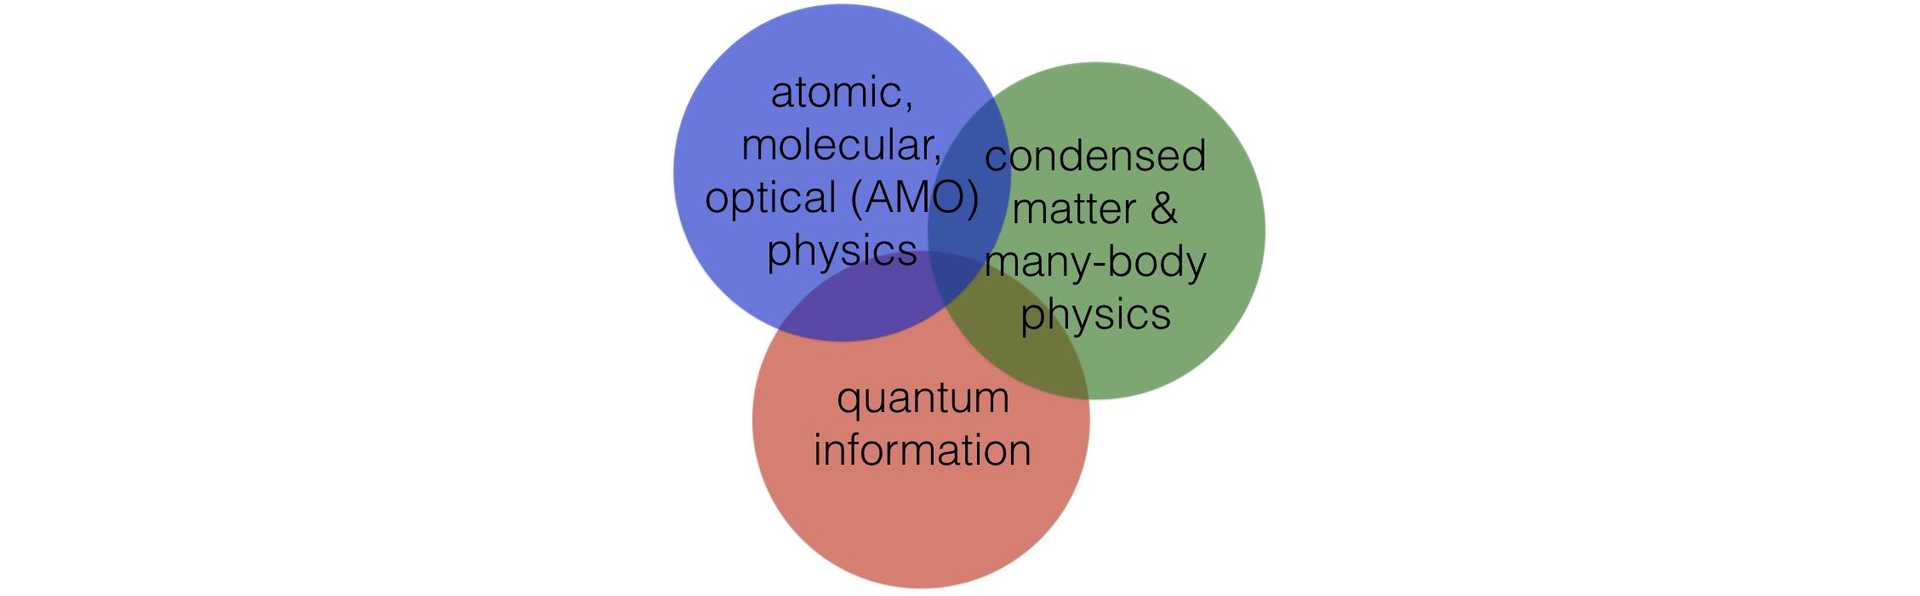 interface of atomic, molecular, optical (AMO) physics, quantum information, and condensed matter (as well as many-body) physics